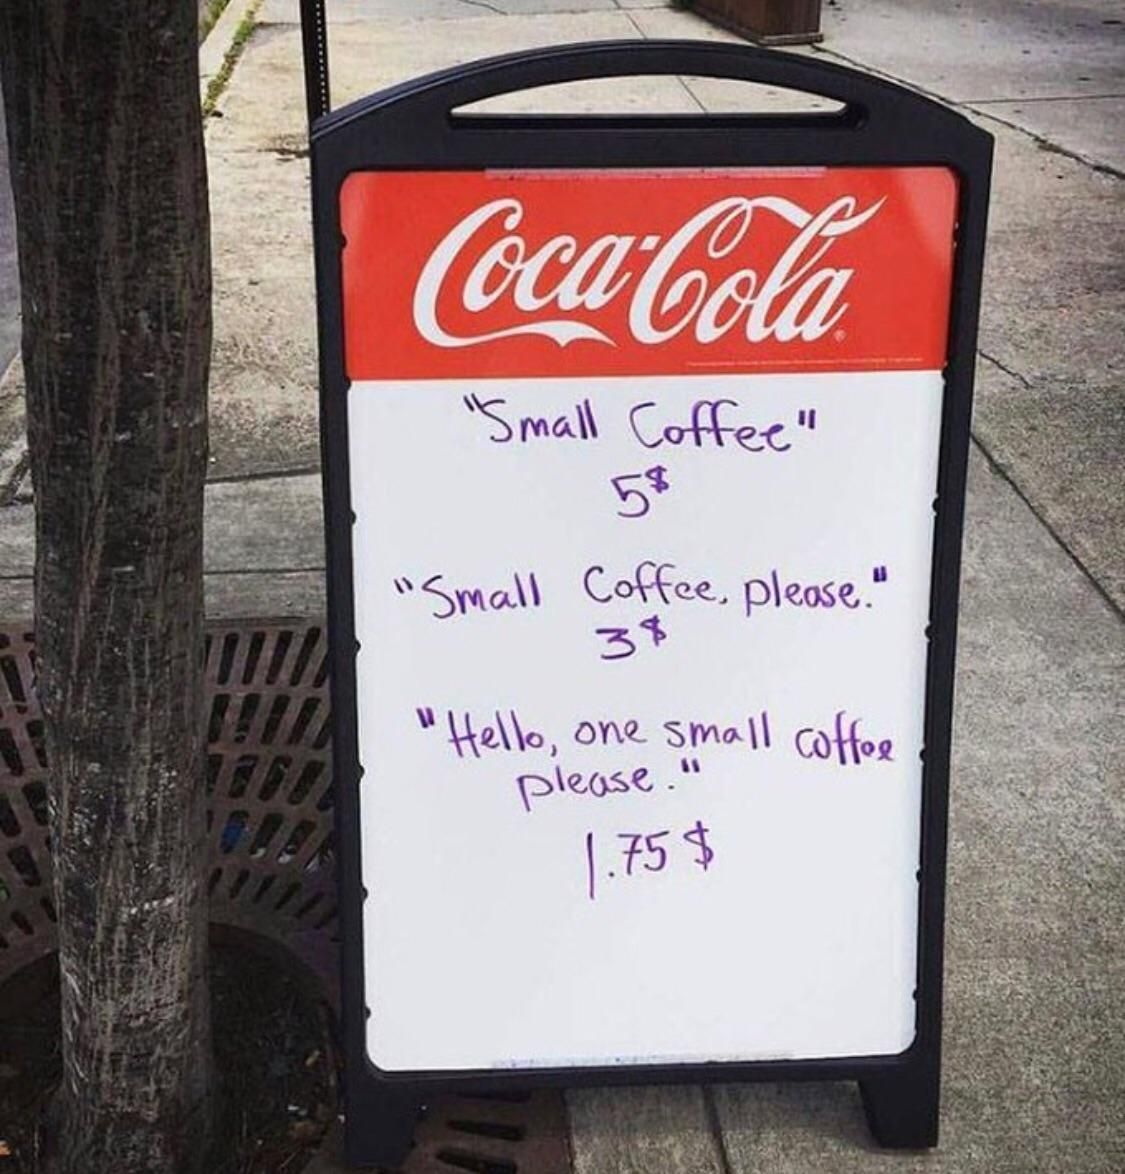 Manners cost you nothing, but the opposite might end up costing you more in Sarasota!